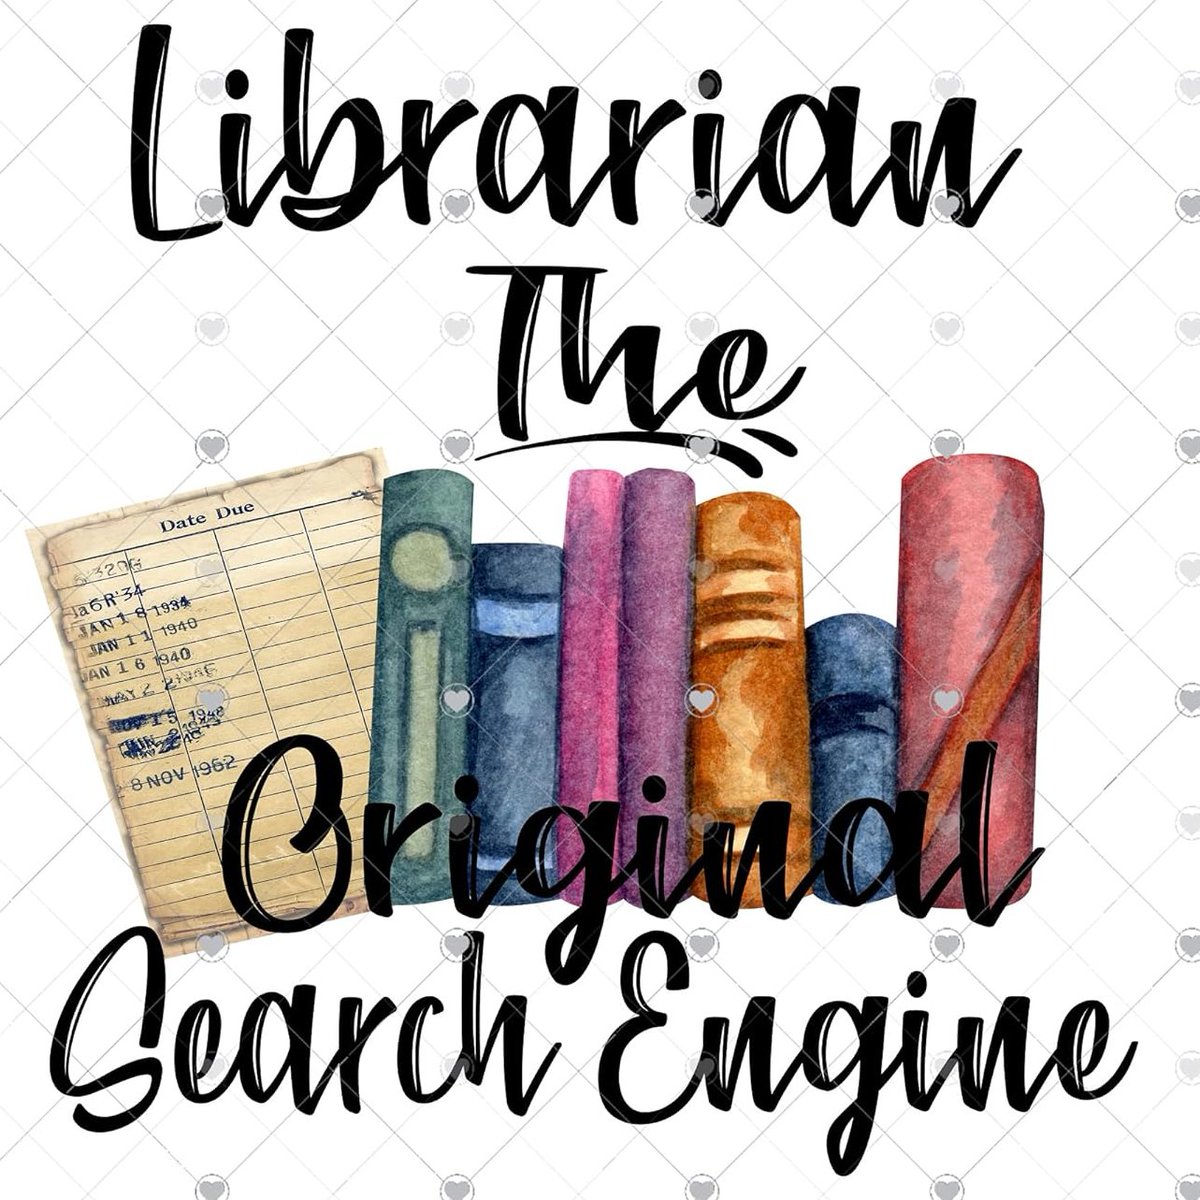 Librarian the Original Search Engine Sublimation Transfer Ready to Press, School Librarian Gift, Gift Exchange, Gift from Student, Library (Child x1-6') 

amzn.to/441U0g1 via @amazon #affiliate #NationalSchoolLibrarianDay